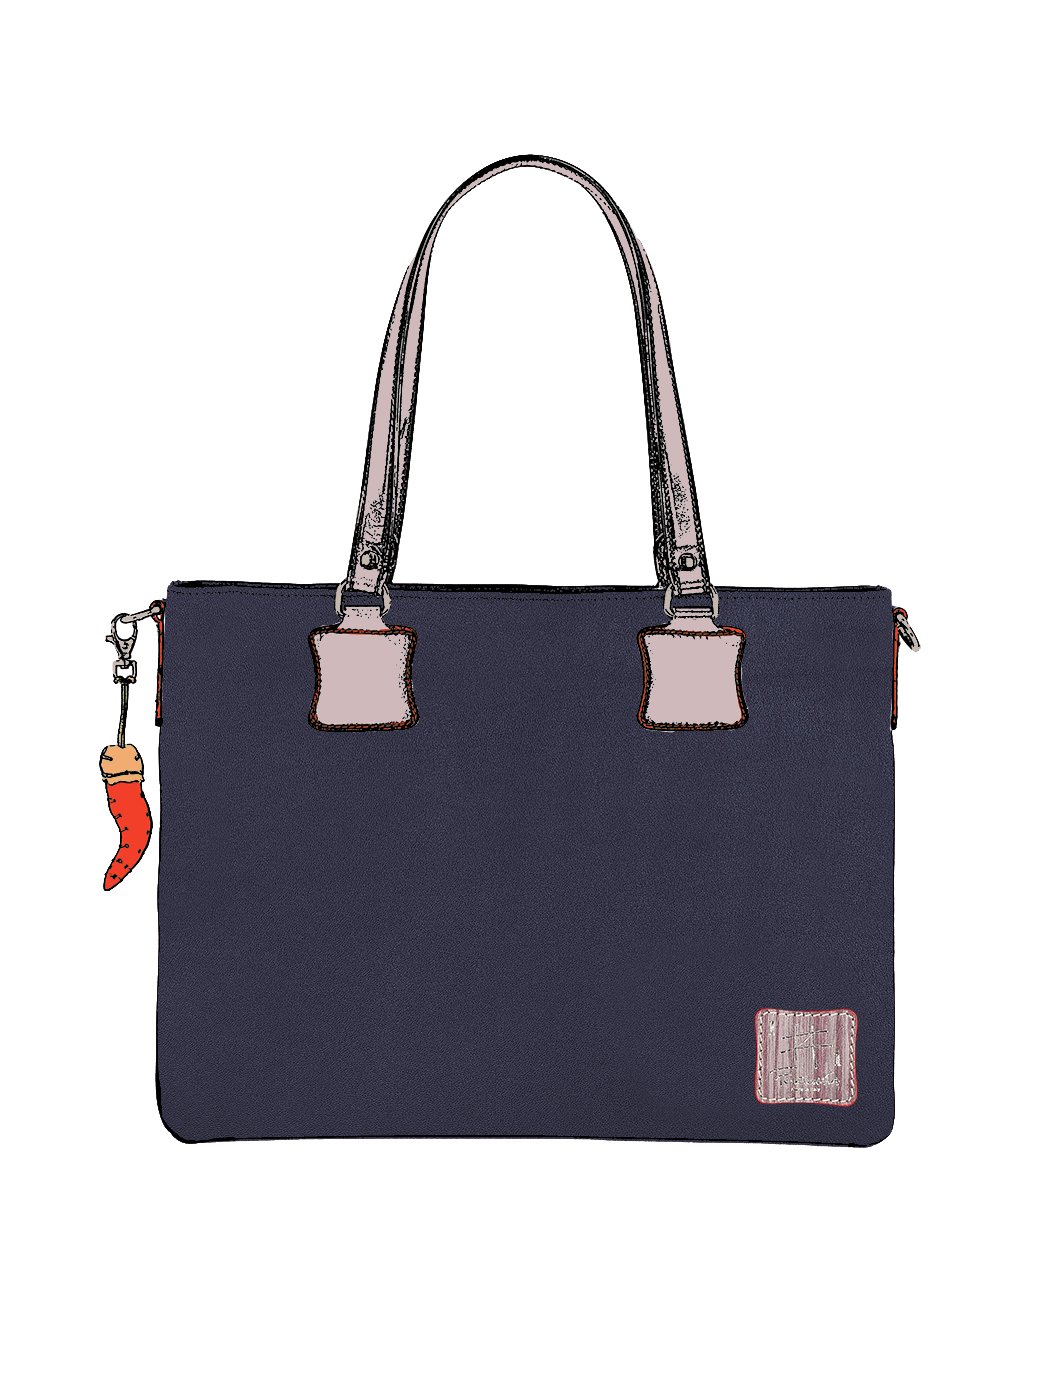 Shoulder Tote Bag Leather Blue - Handmade in Italy